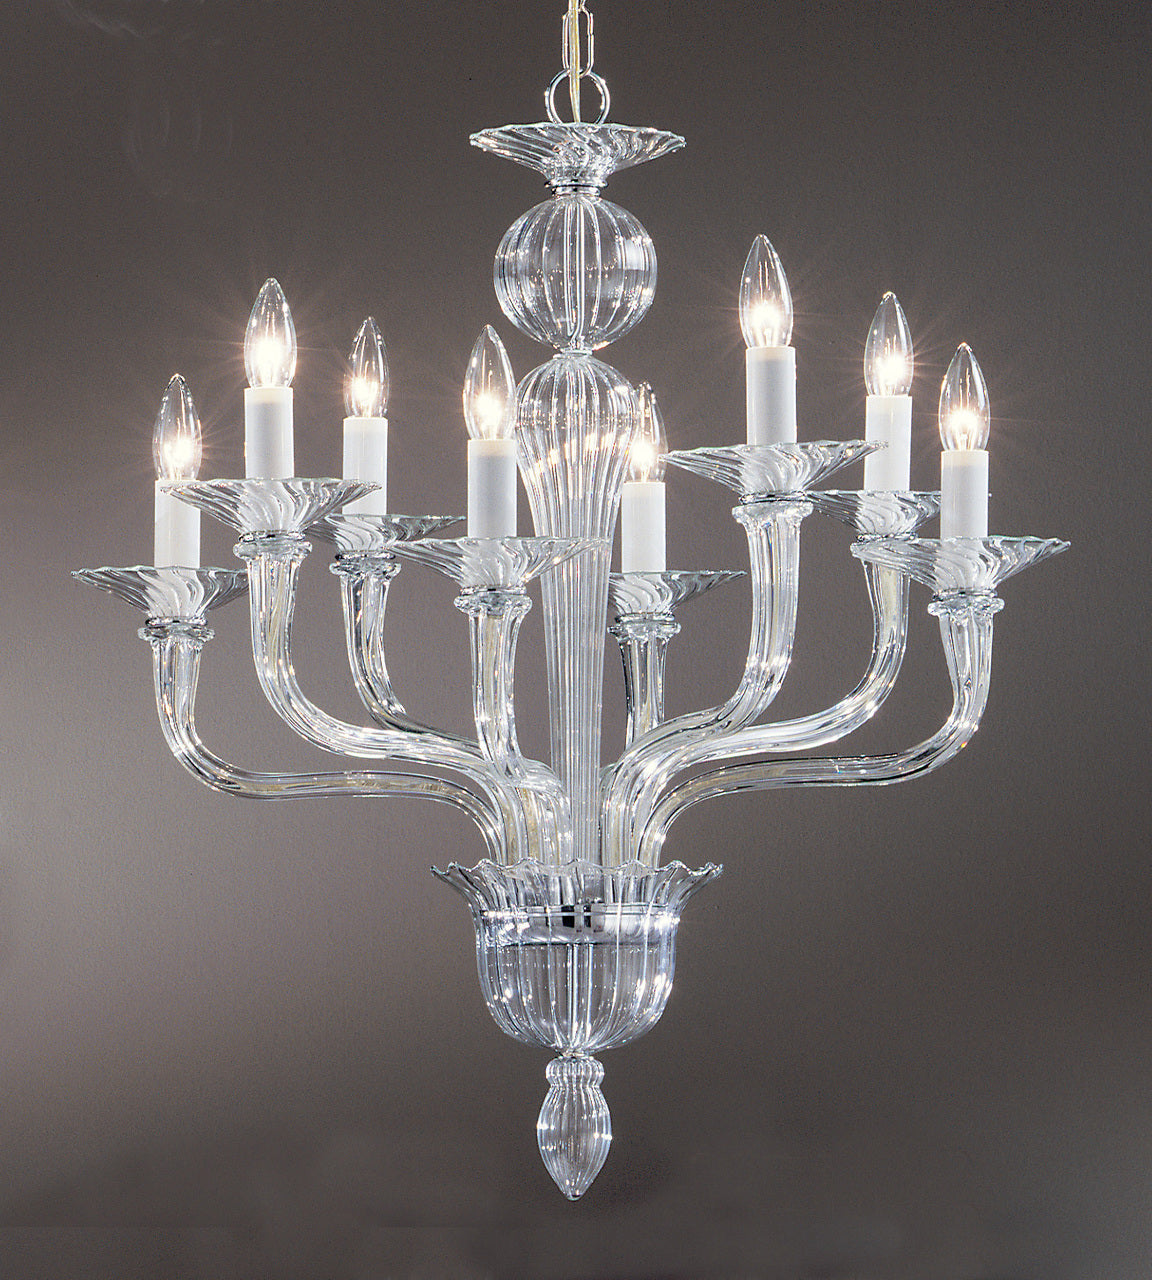 Classic Lighting 8291 CH Palermo Crystal/Glass Chandelier in Chrome (Imported from Spain)